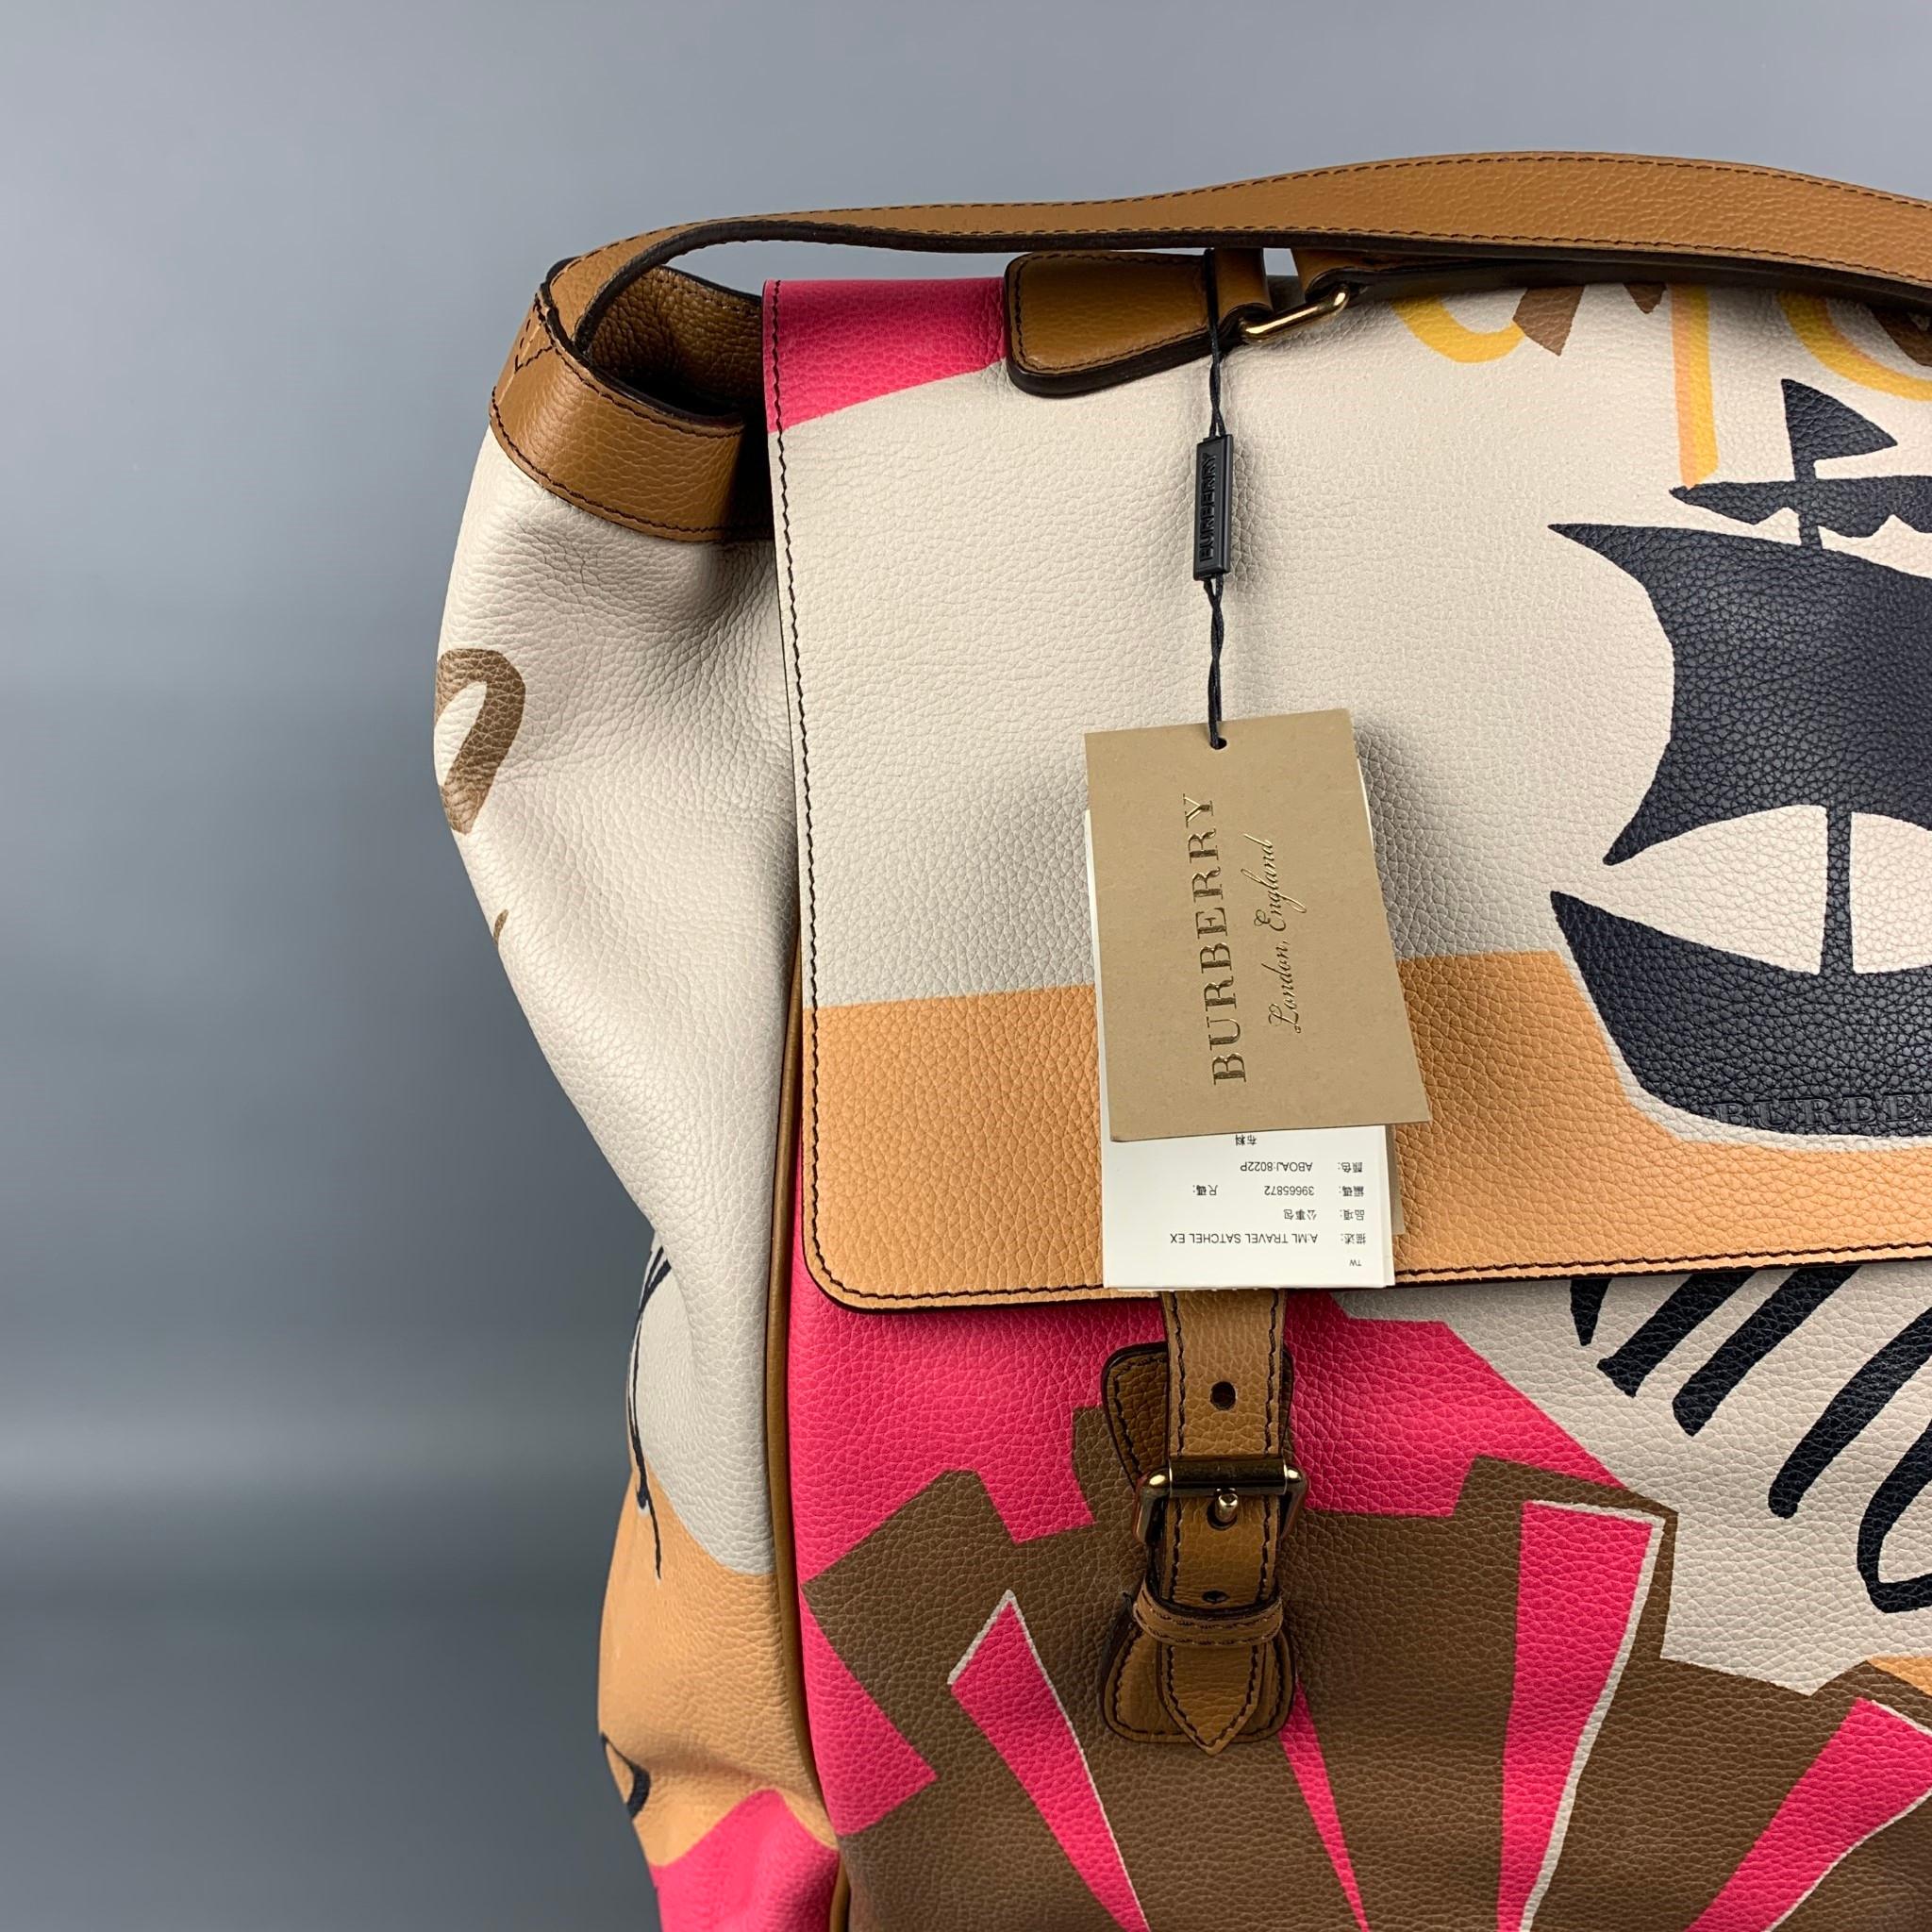 Burberry Prorsum Spring 2015 Adventure Large Travel Satchel by Christopher Bailey. Lux Pebbled Calf Leather. Features jubilant renderings of sailboats and sunshine, and inspirational epithets such as 